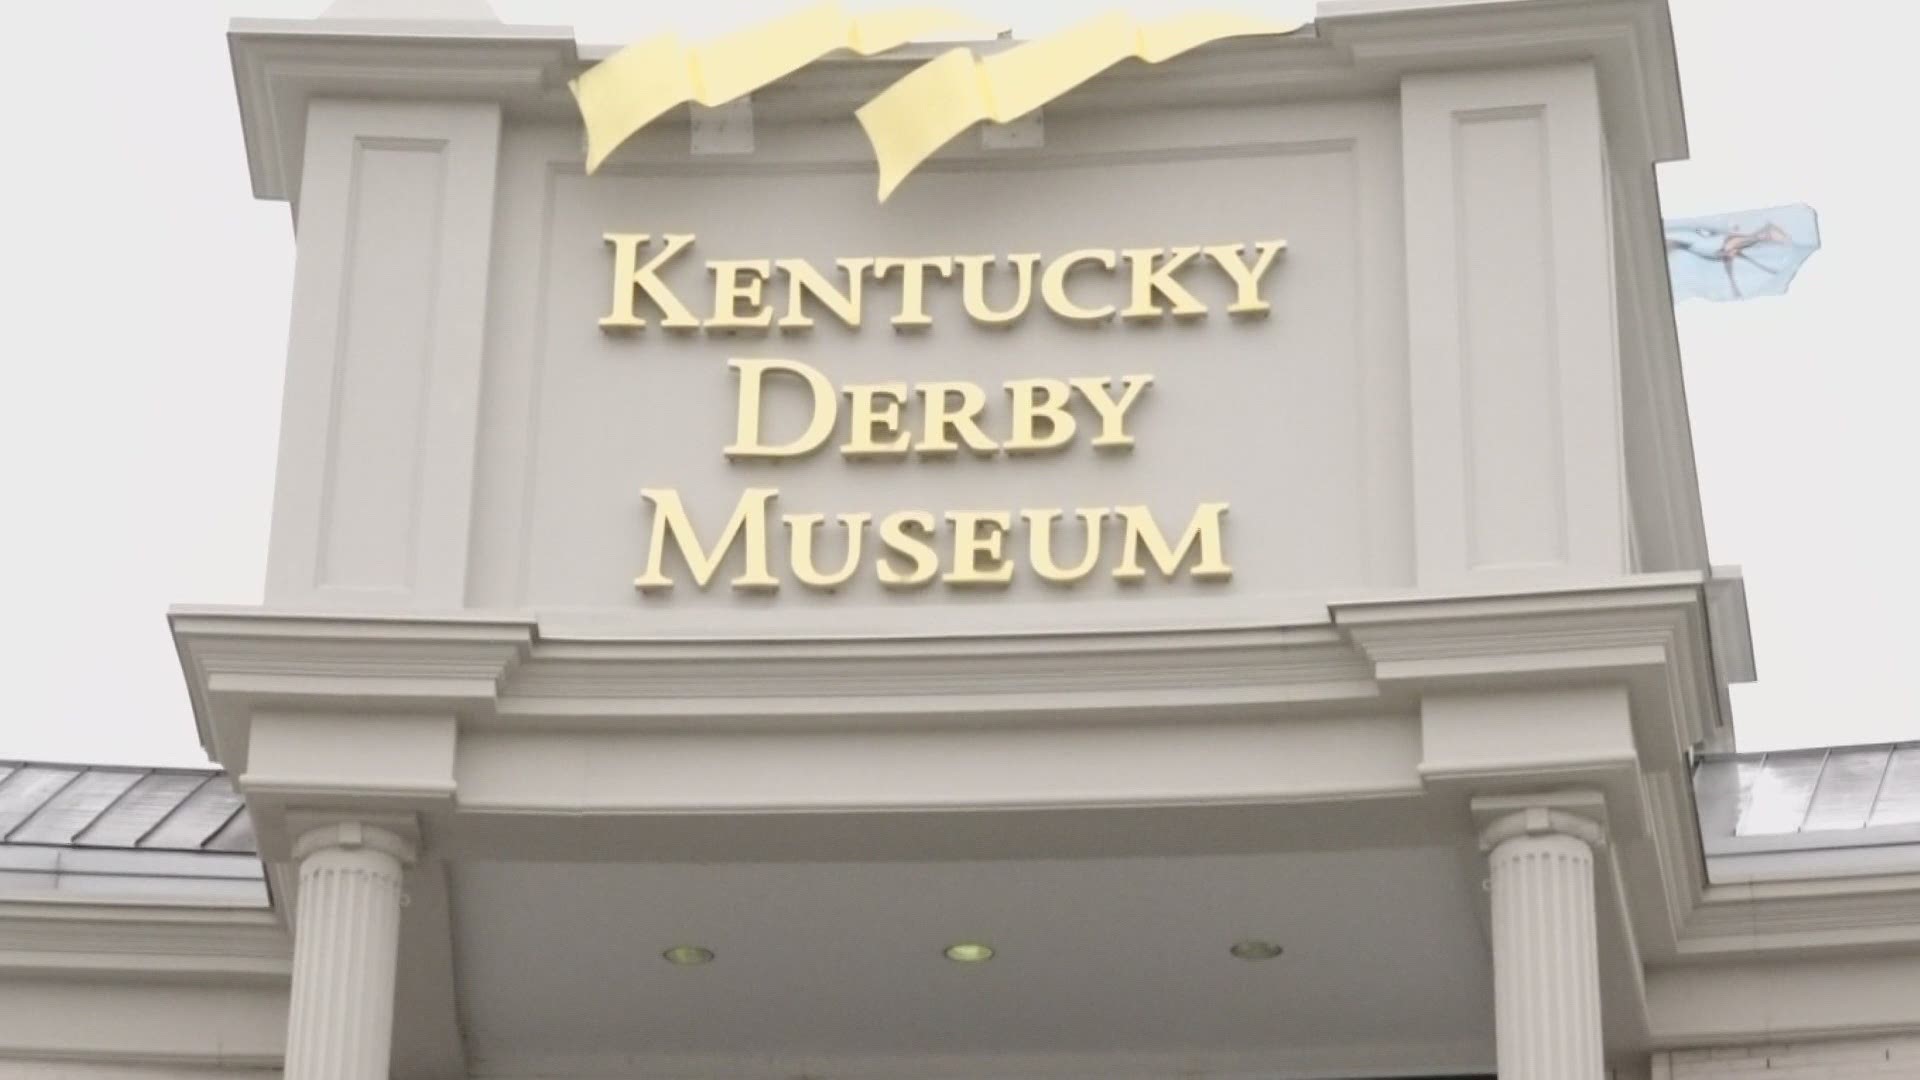 Underneath the museum is a space filled with thousands of Derby artifacts from over the years.